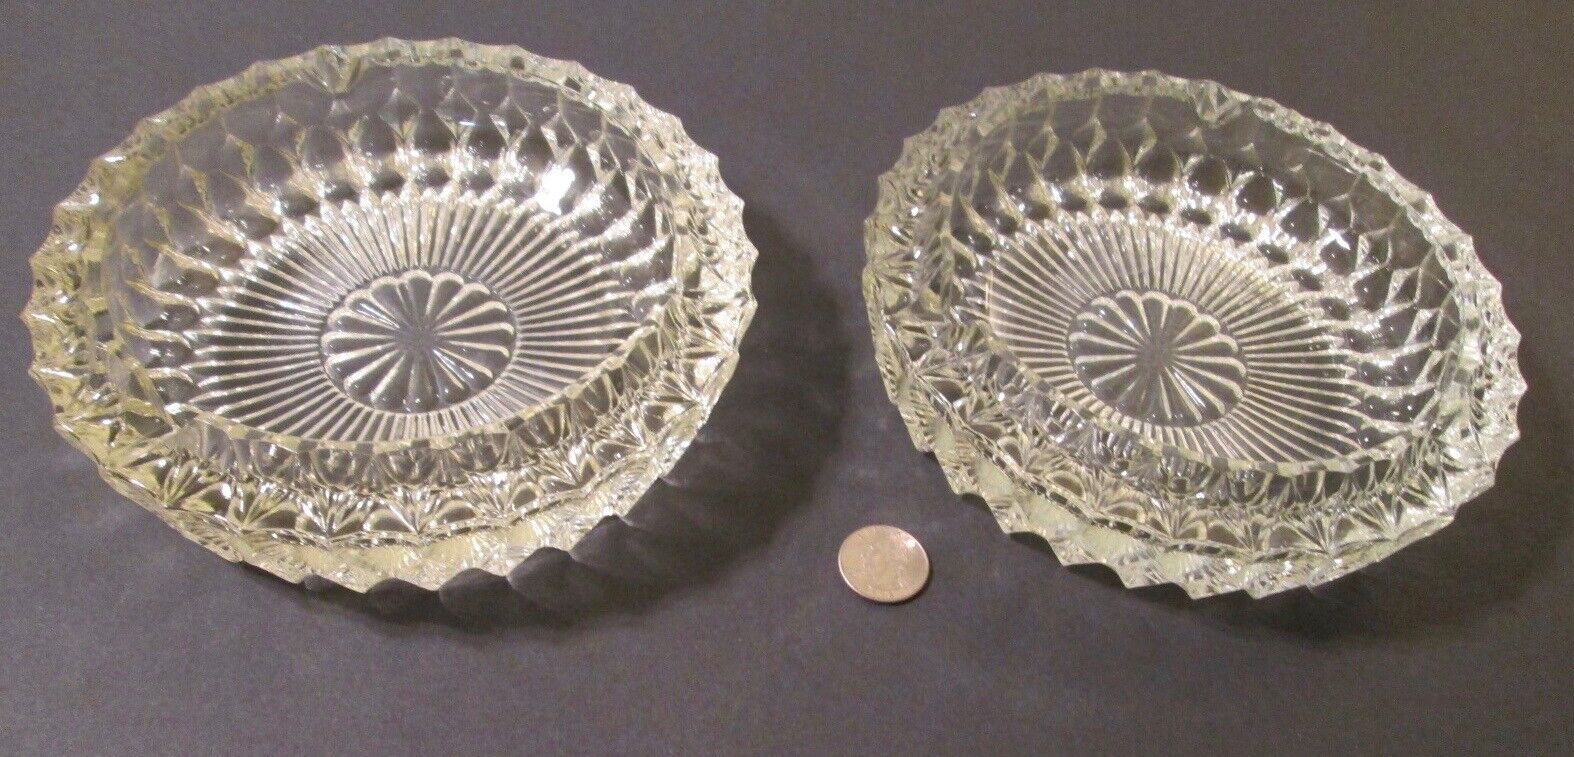 Two (2) VINTAGE CRYSTAL ASHTRAYS: Big & Heavy For Cigarettes or Cigars 